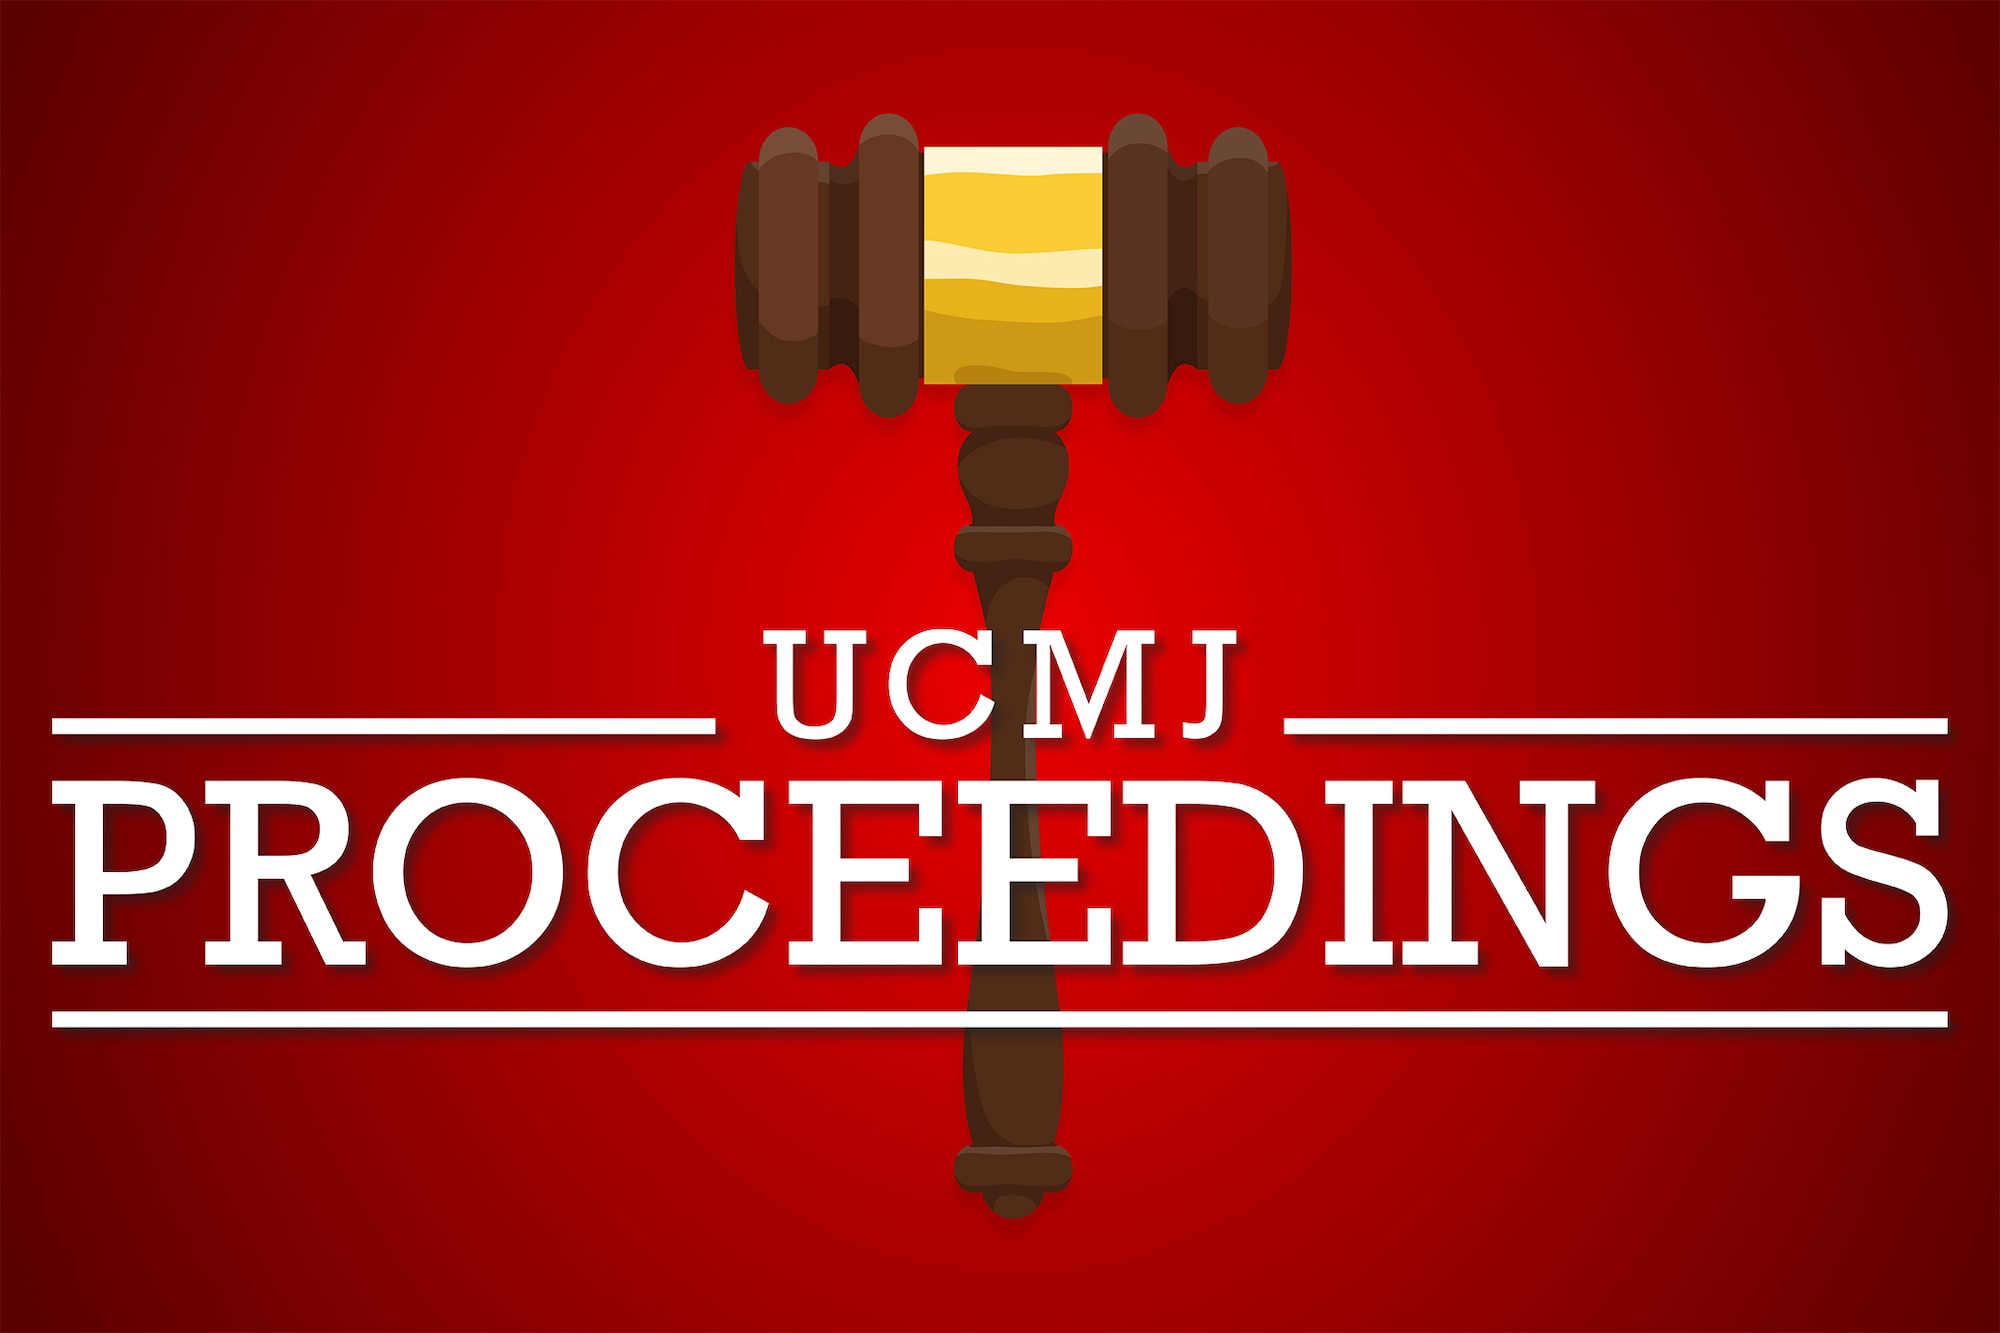 A gavel on a red background to represent UCMJ proceedings.